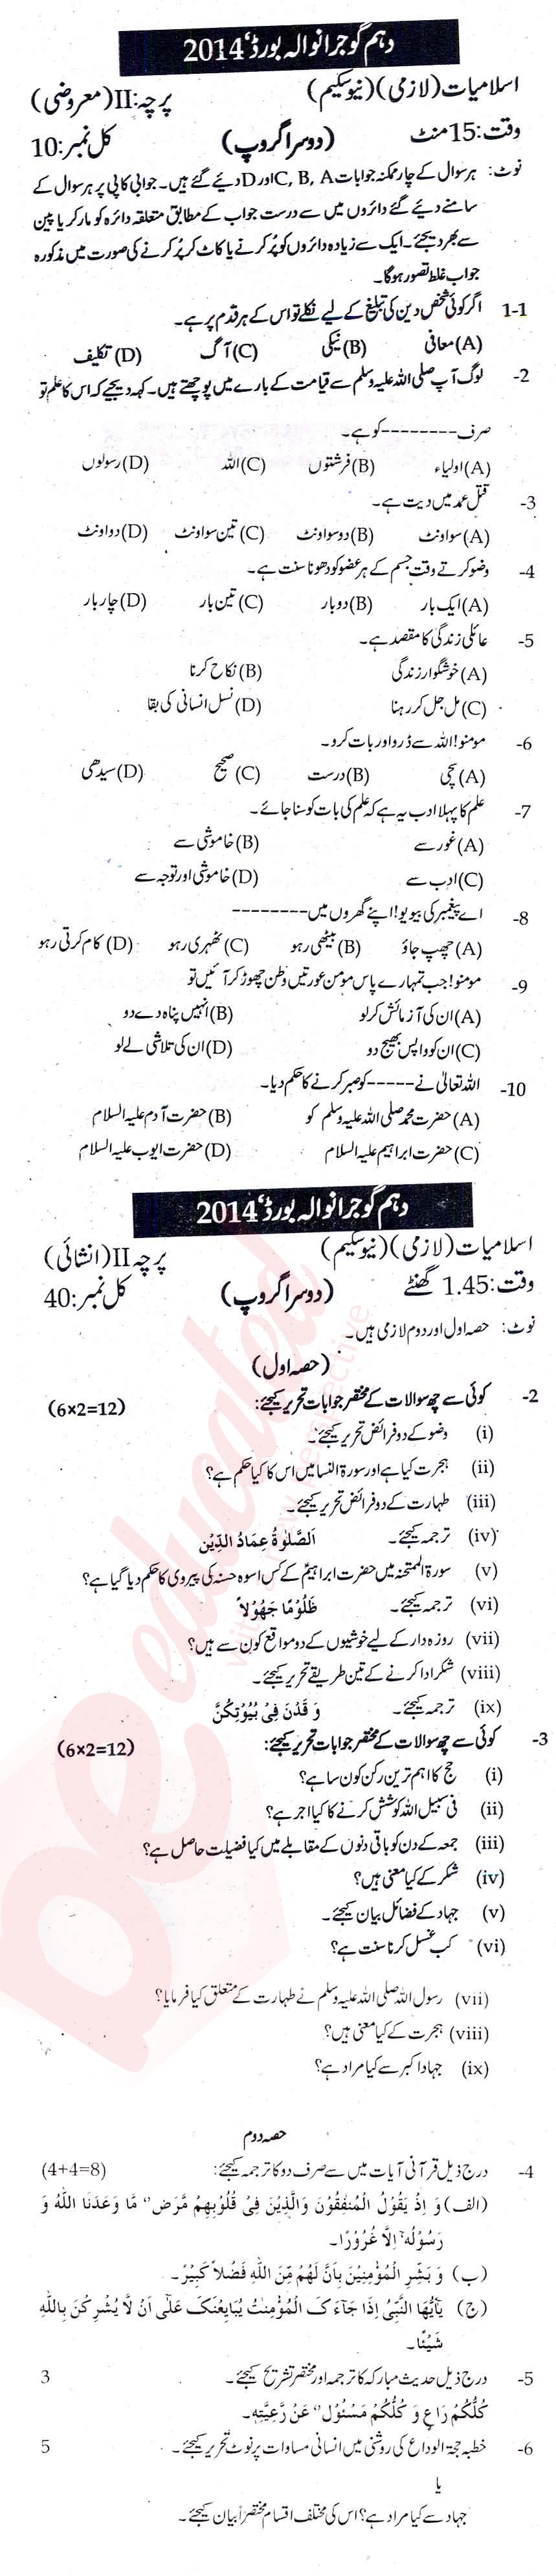 Islamiat (Compulsory) 10th class Past Paper Group 2 BISE Gujranwala 2014